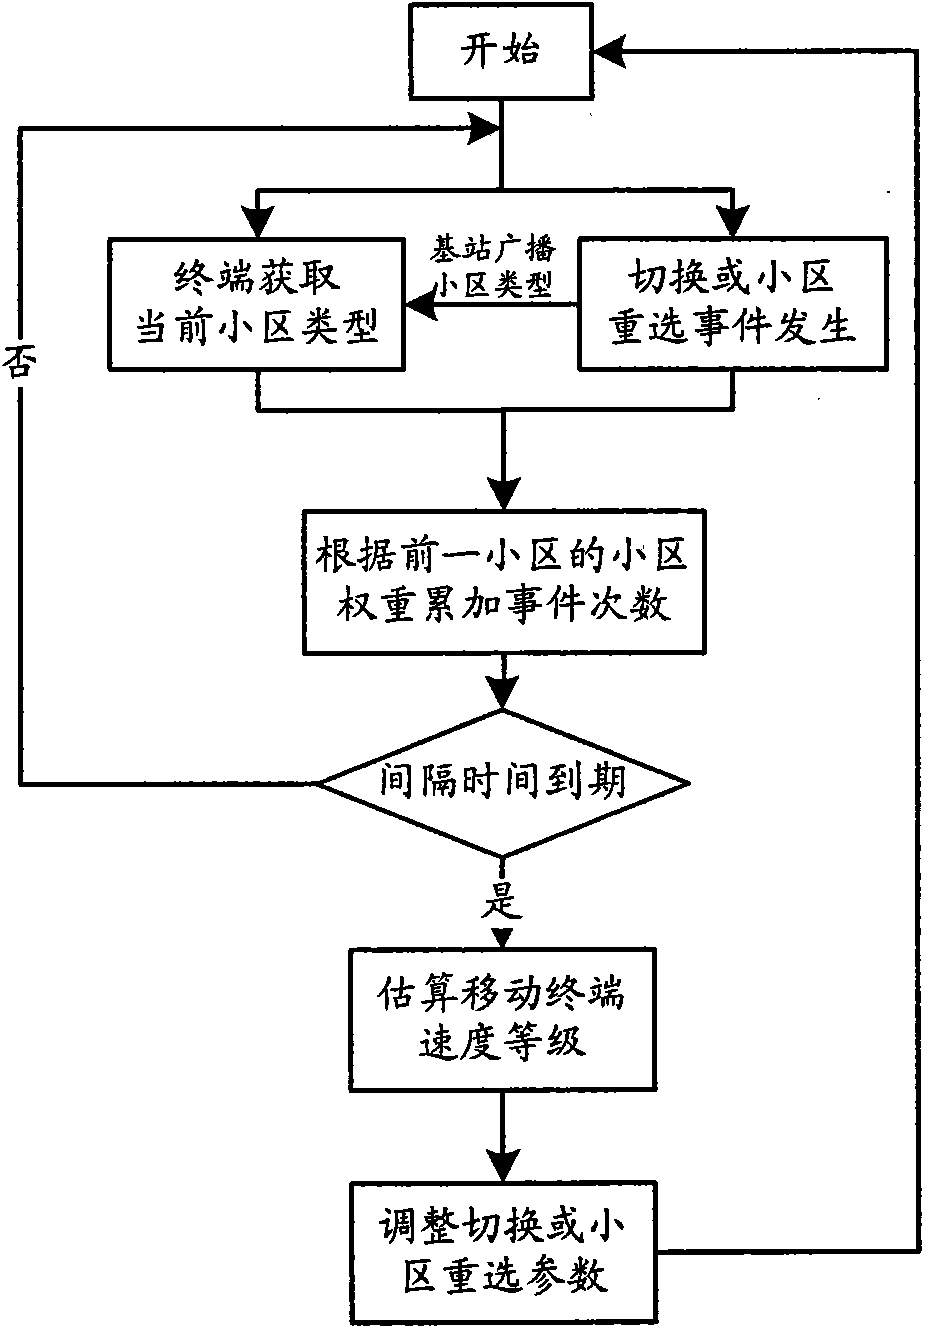 Method for estimating speed class of mobile terminal in multilevel cellular system